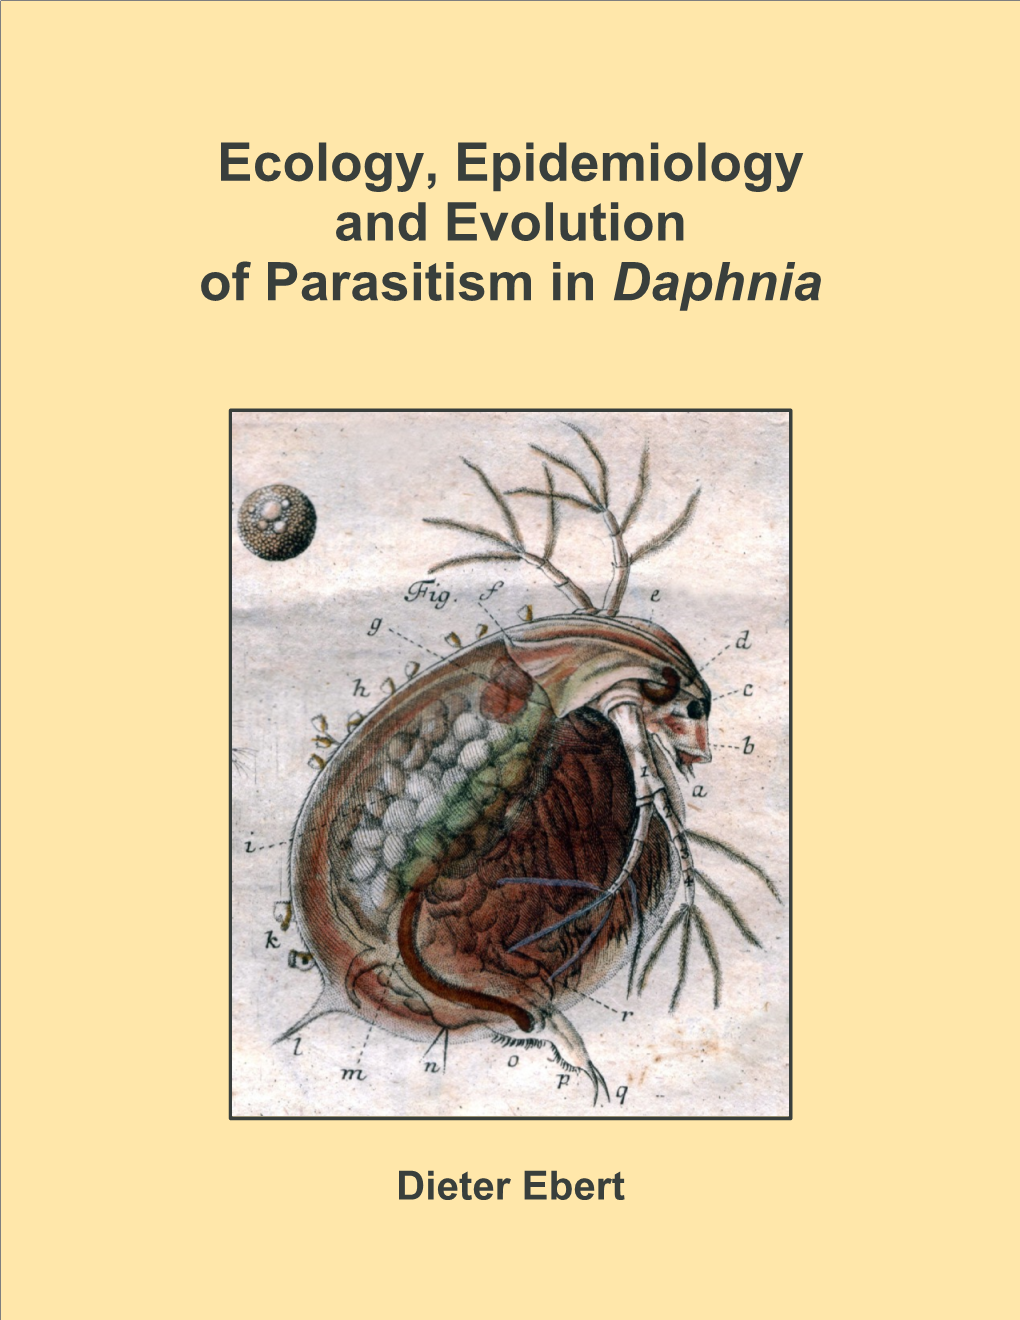 Ecology, Epidemiology, and Evolution of Parasitism in Daphnia [Internet]